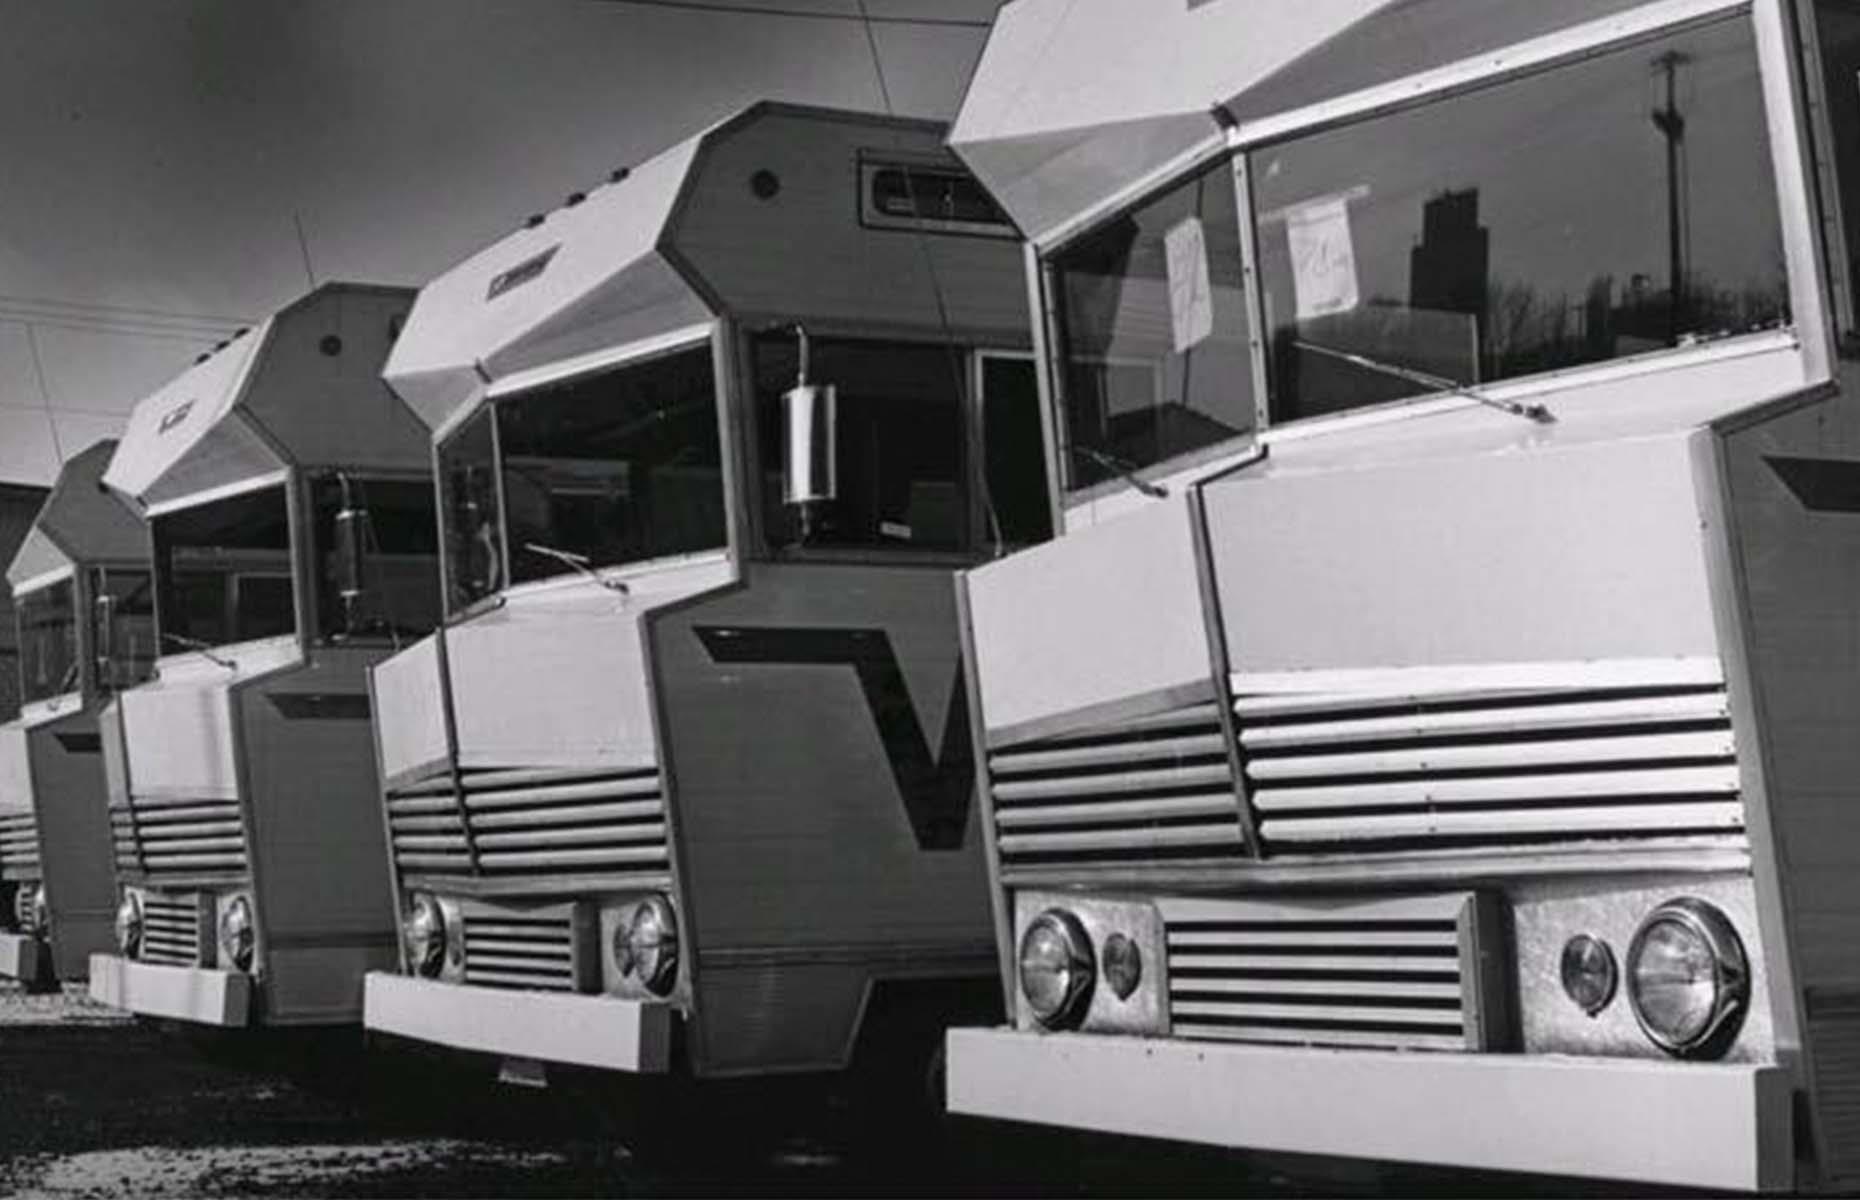 <p>By the 1960s, the RV was beginning to embed itself in American culture. This was helped along by Winnebago who began mass-producing its large, modern motorhomes in this decade. For the first time, the motorized RV was becoming more affordable and accessible to the regular traveler. Stamped with the unmistakable 'W', Winnebago RVs are still ubiquitous.</p>  <p><strong><a href="https://www.loveexploring.com/galleries/95350/vintage-photos-of-american-summer-vacations">Discover incredible vintage photos of American summer vacations</a></strong></p>